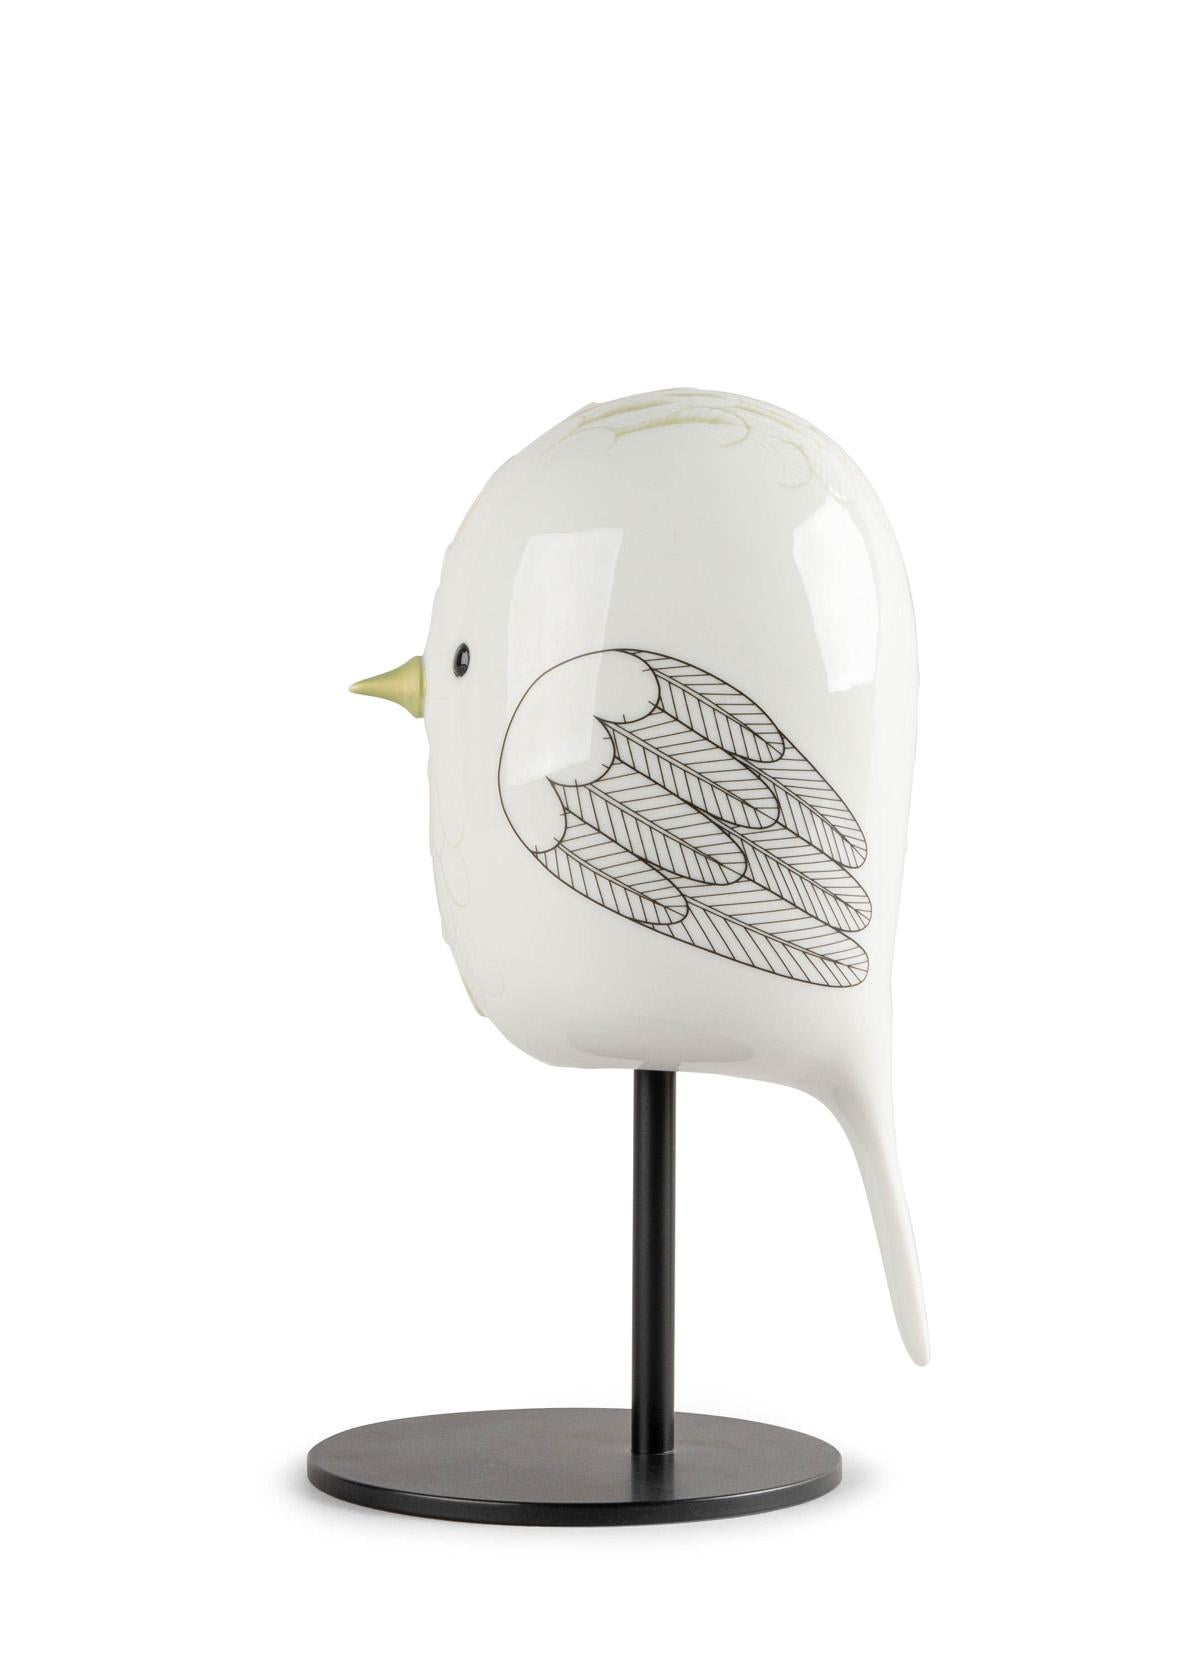 Handmade porcelain creation inspired by a Sparrow, belonging to Face 2 Face collection. Sparrow belongs to Face 2 Face collection featuring cute birds that combine synthetized forms with a two-fold decorative treatment. Pieces created using